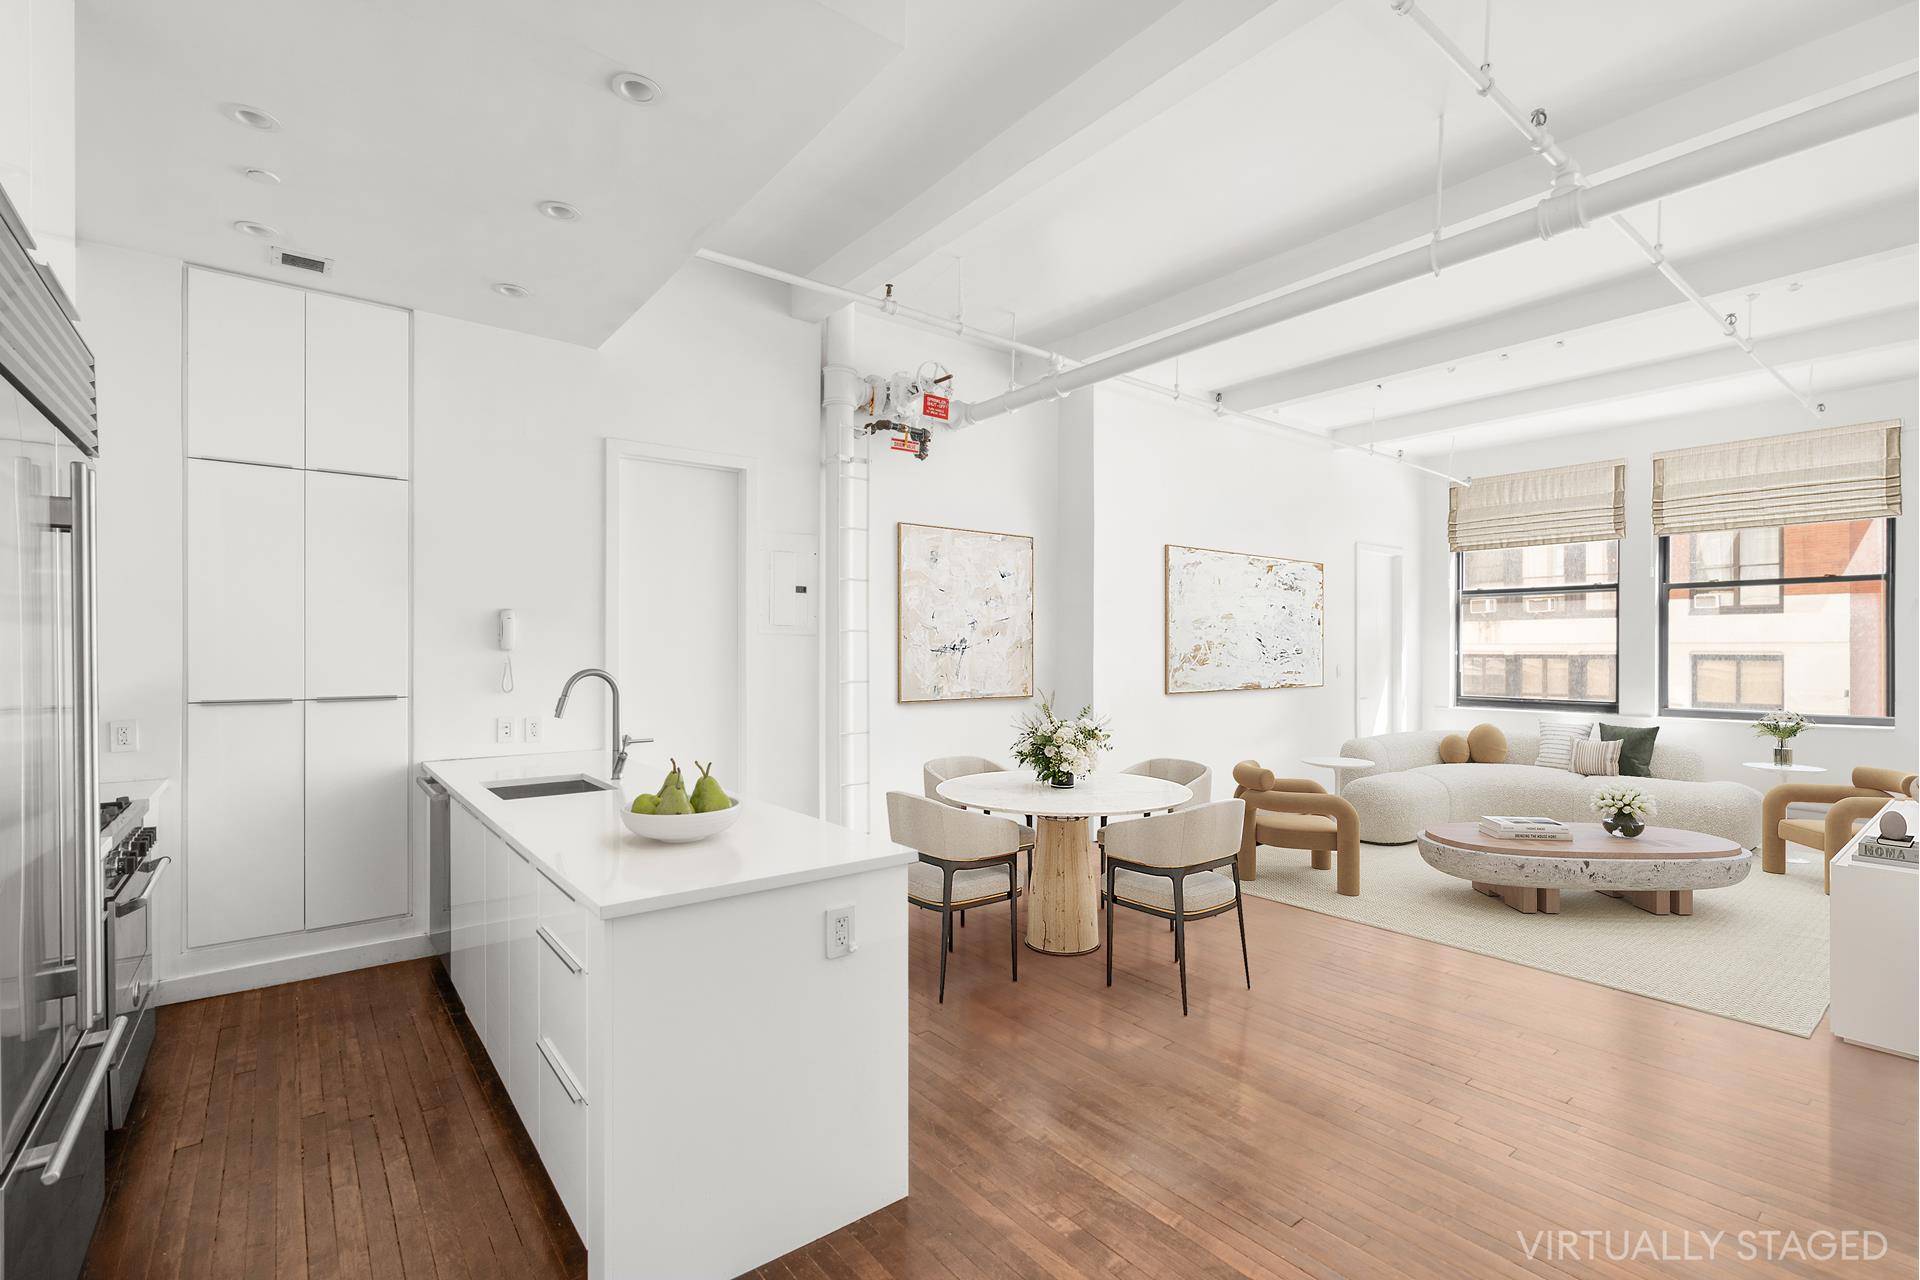 Welcome to 222 Park Avenue South, Unit 3C, right at the heart of New York City's vibrant Flatiron neighborhood.